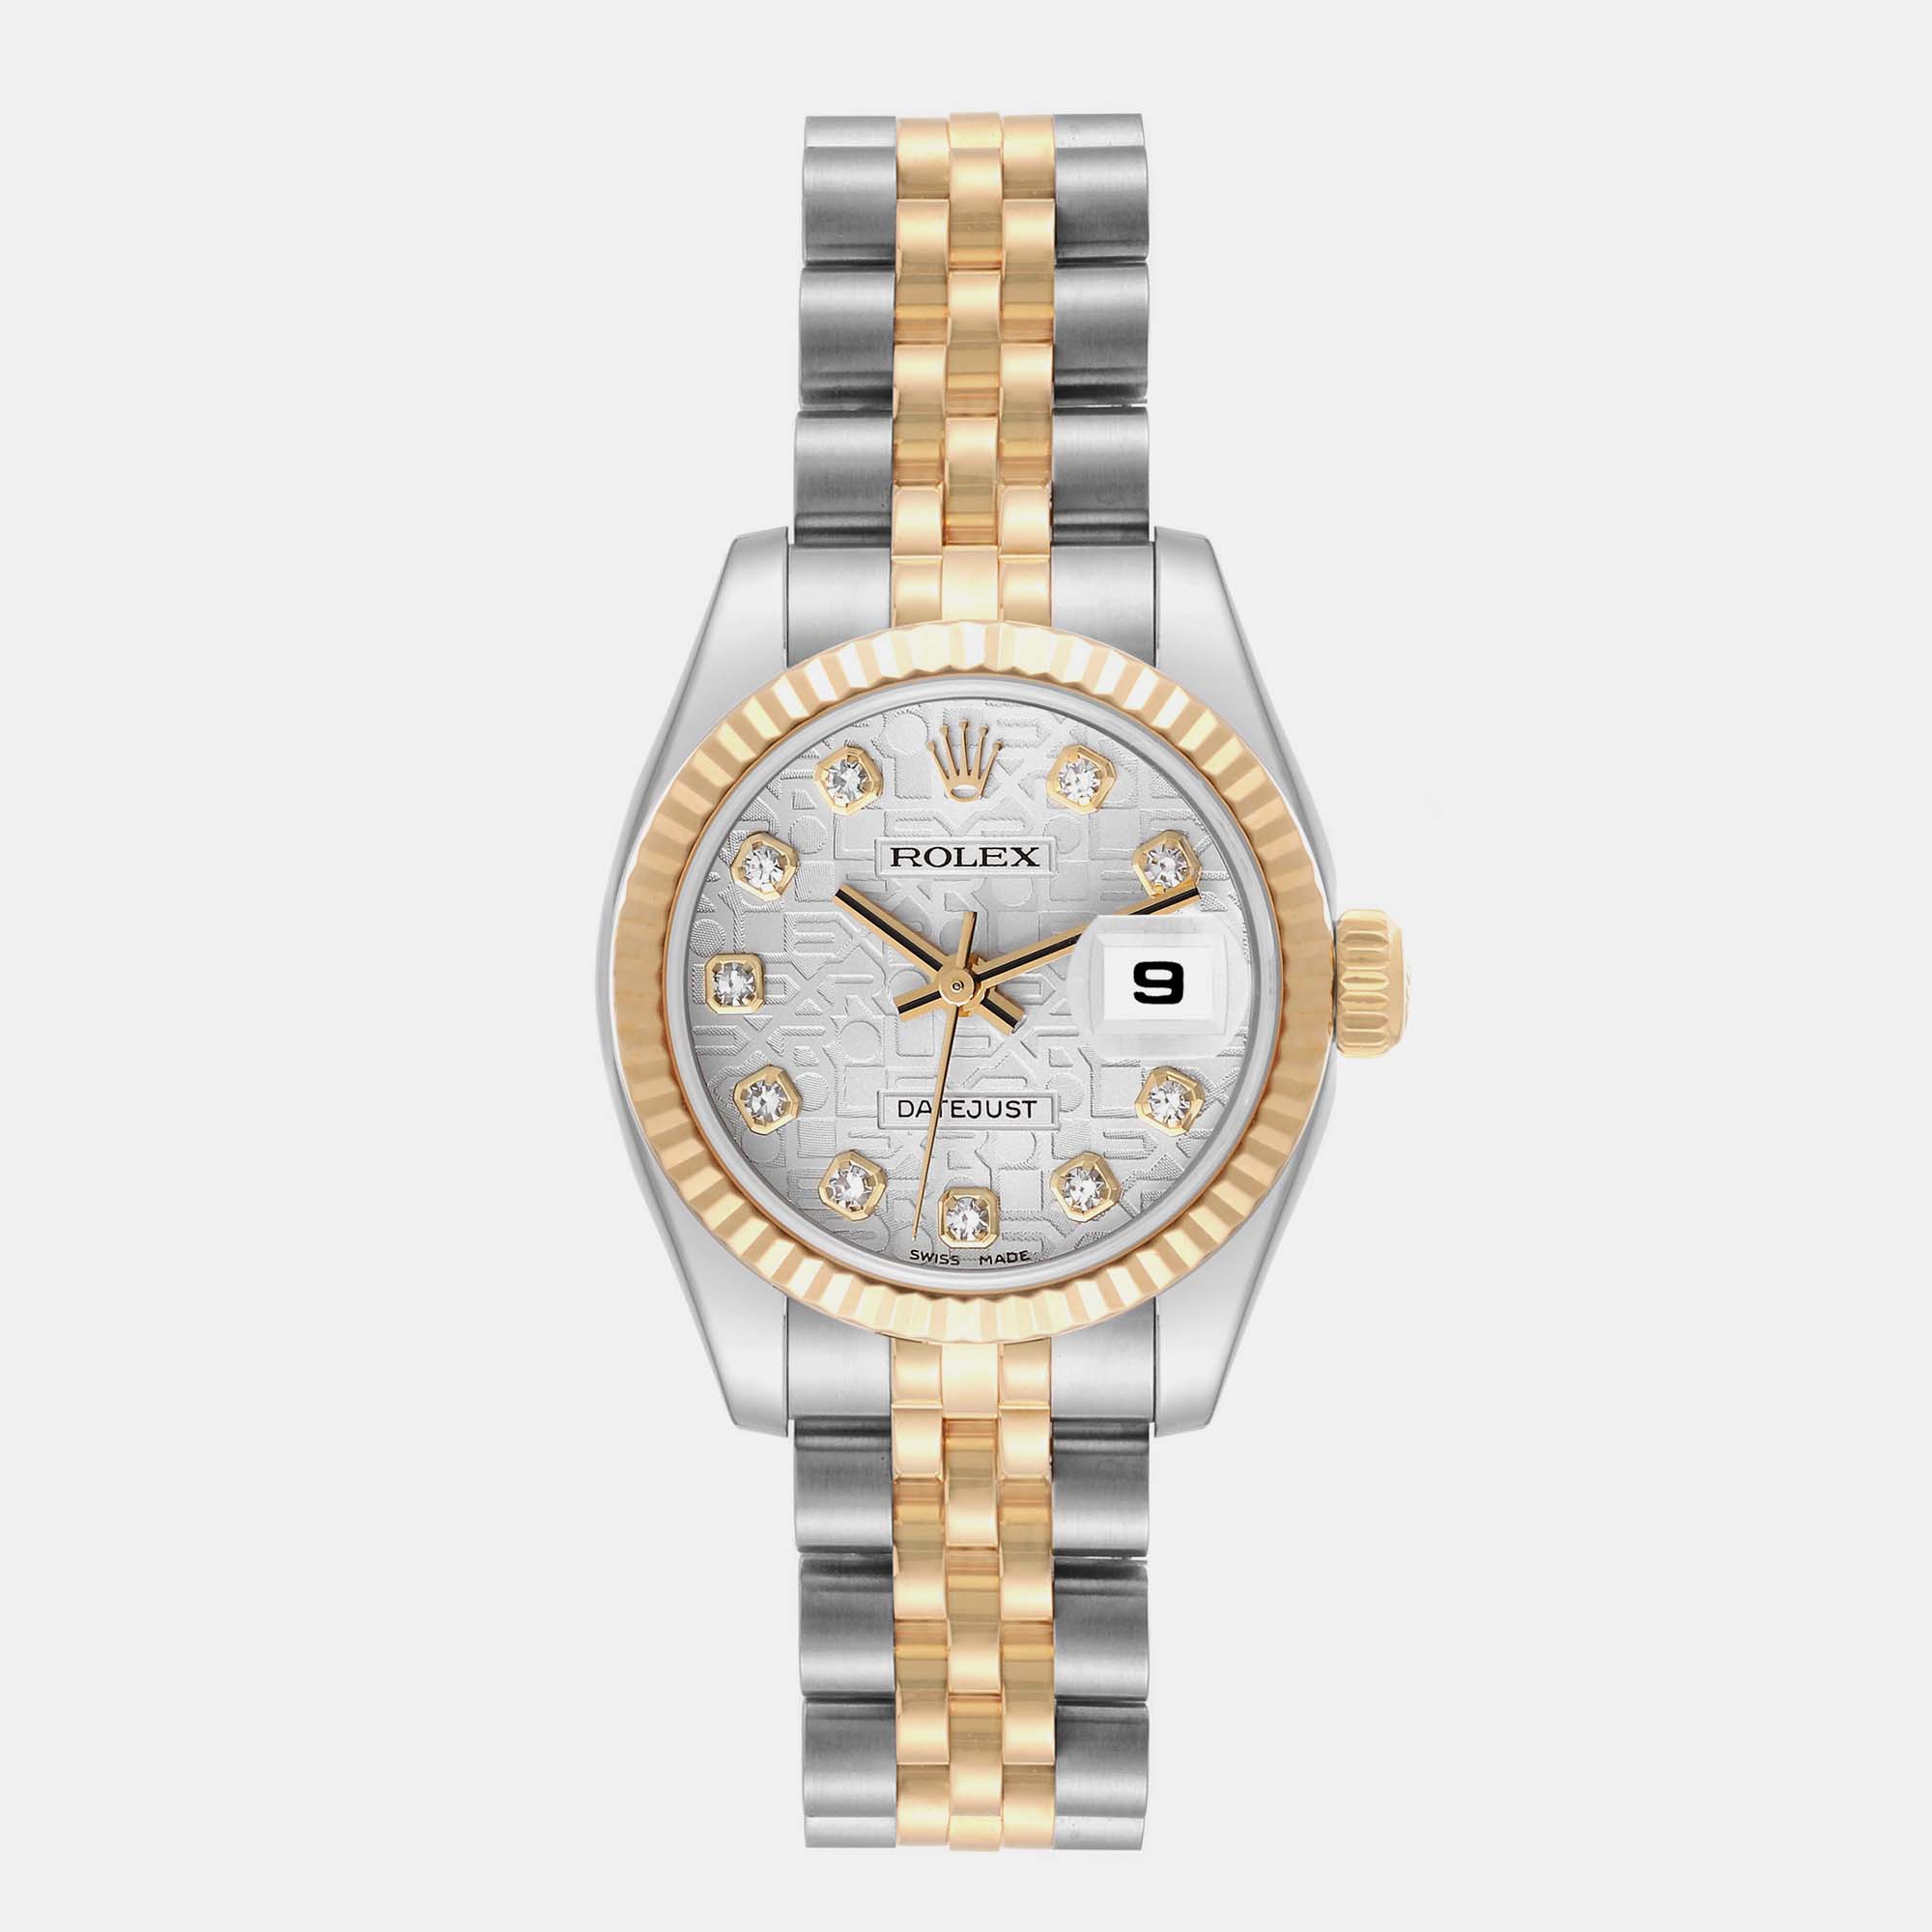 Pre-owned Rolex Datejust Steel Yellow Gold Anniversary Diamond Dial Ladies Watch 179173 In Silver